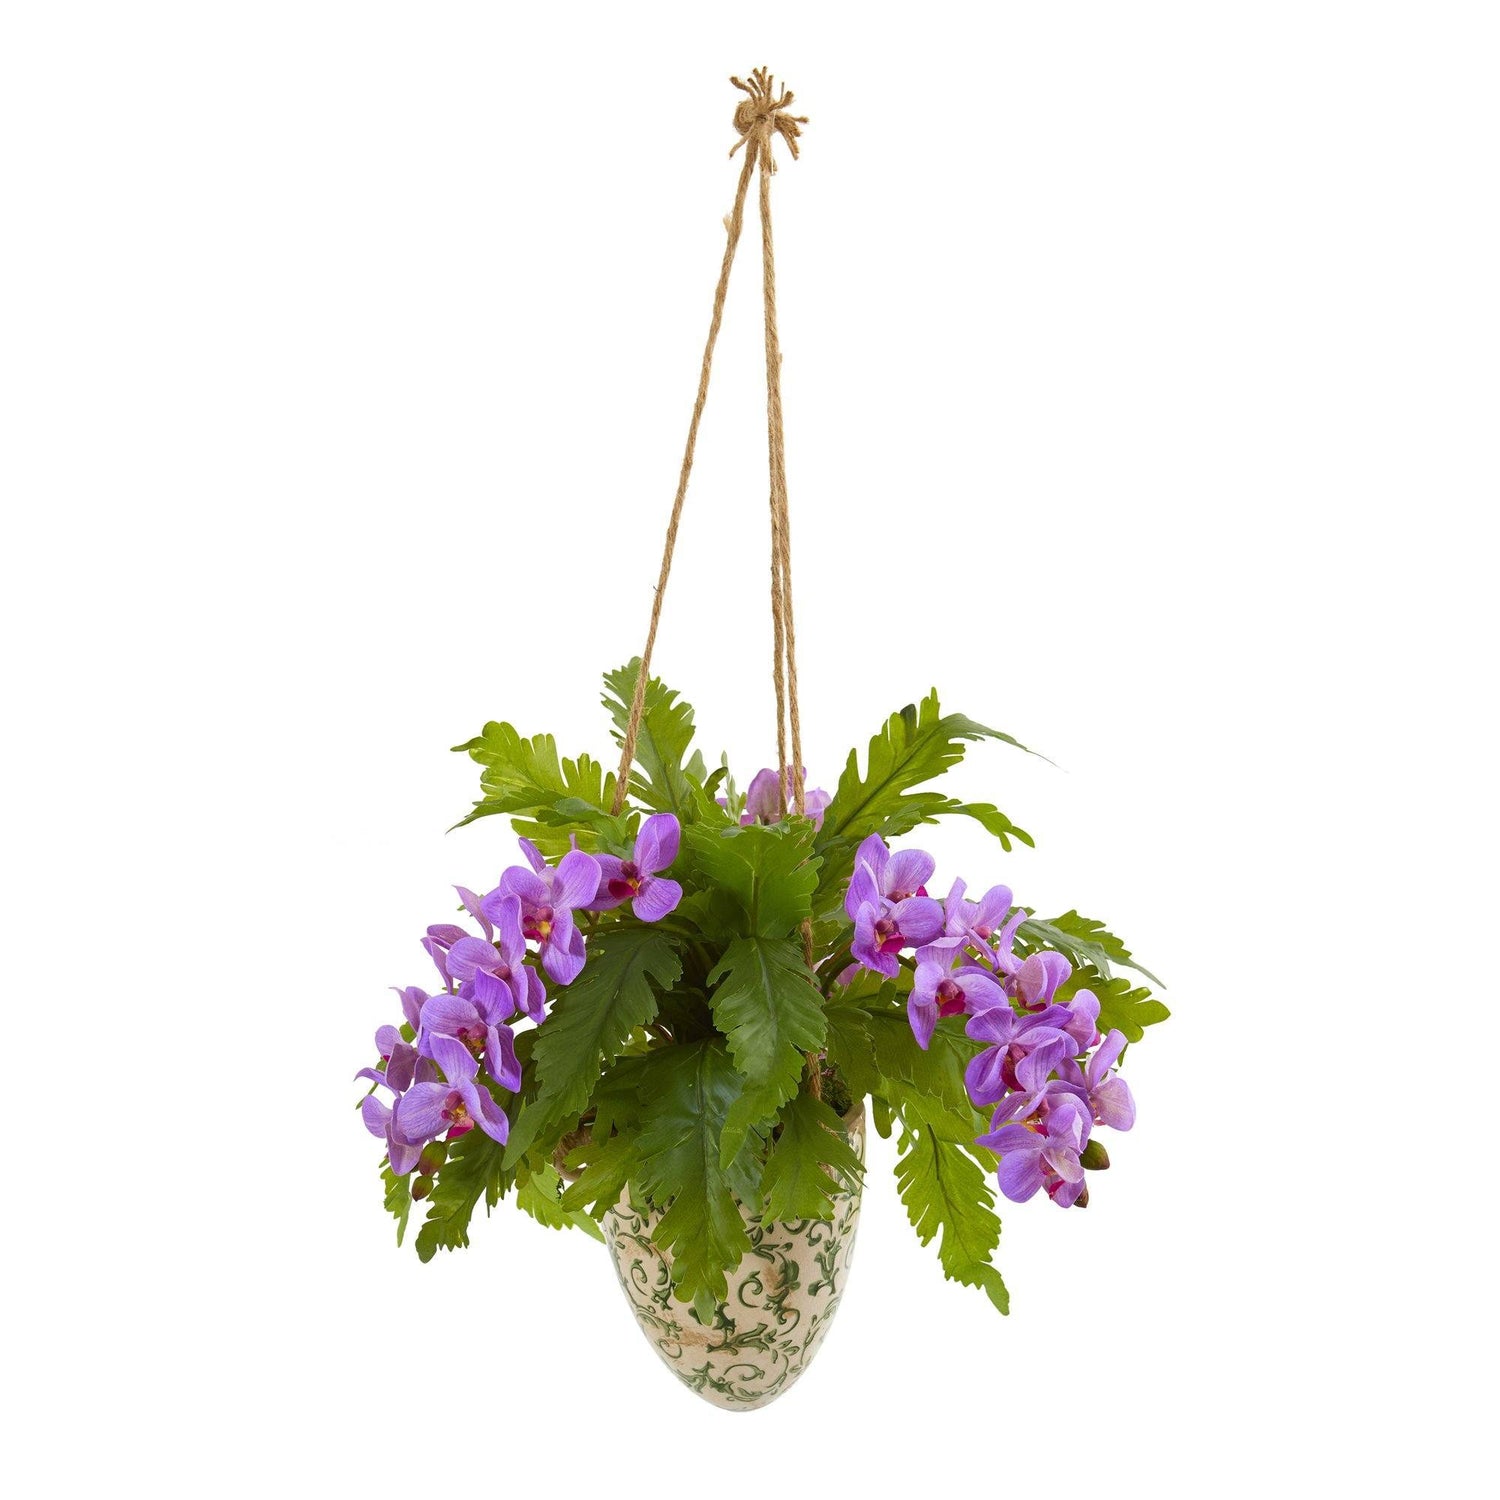 26” Phalaenopsis Orchid and Fern Plant in Hanging Vase